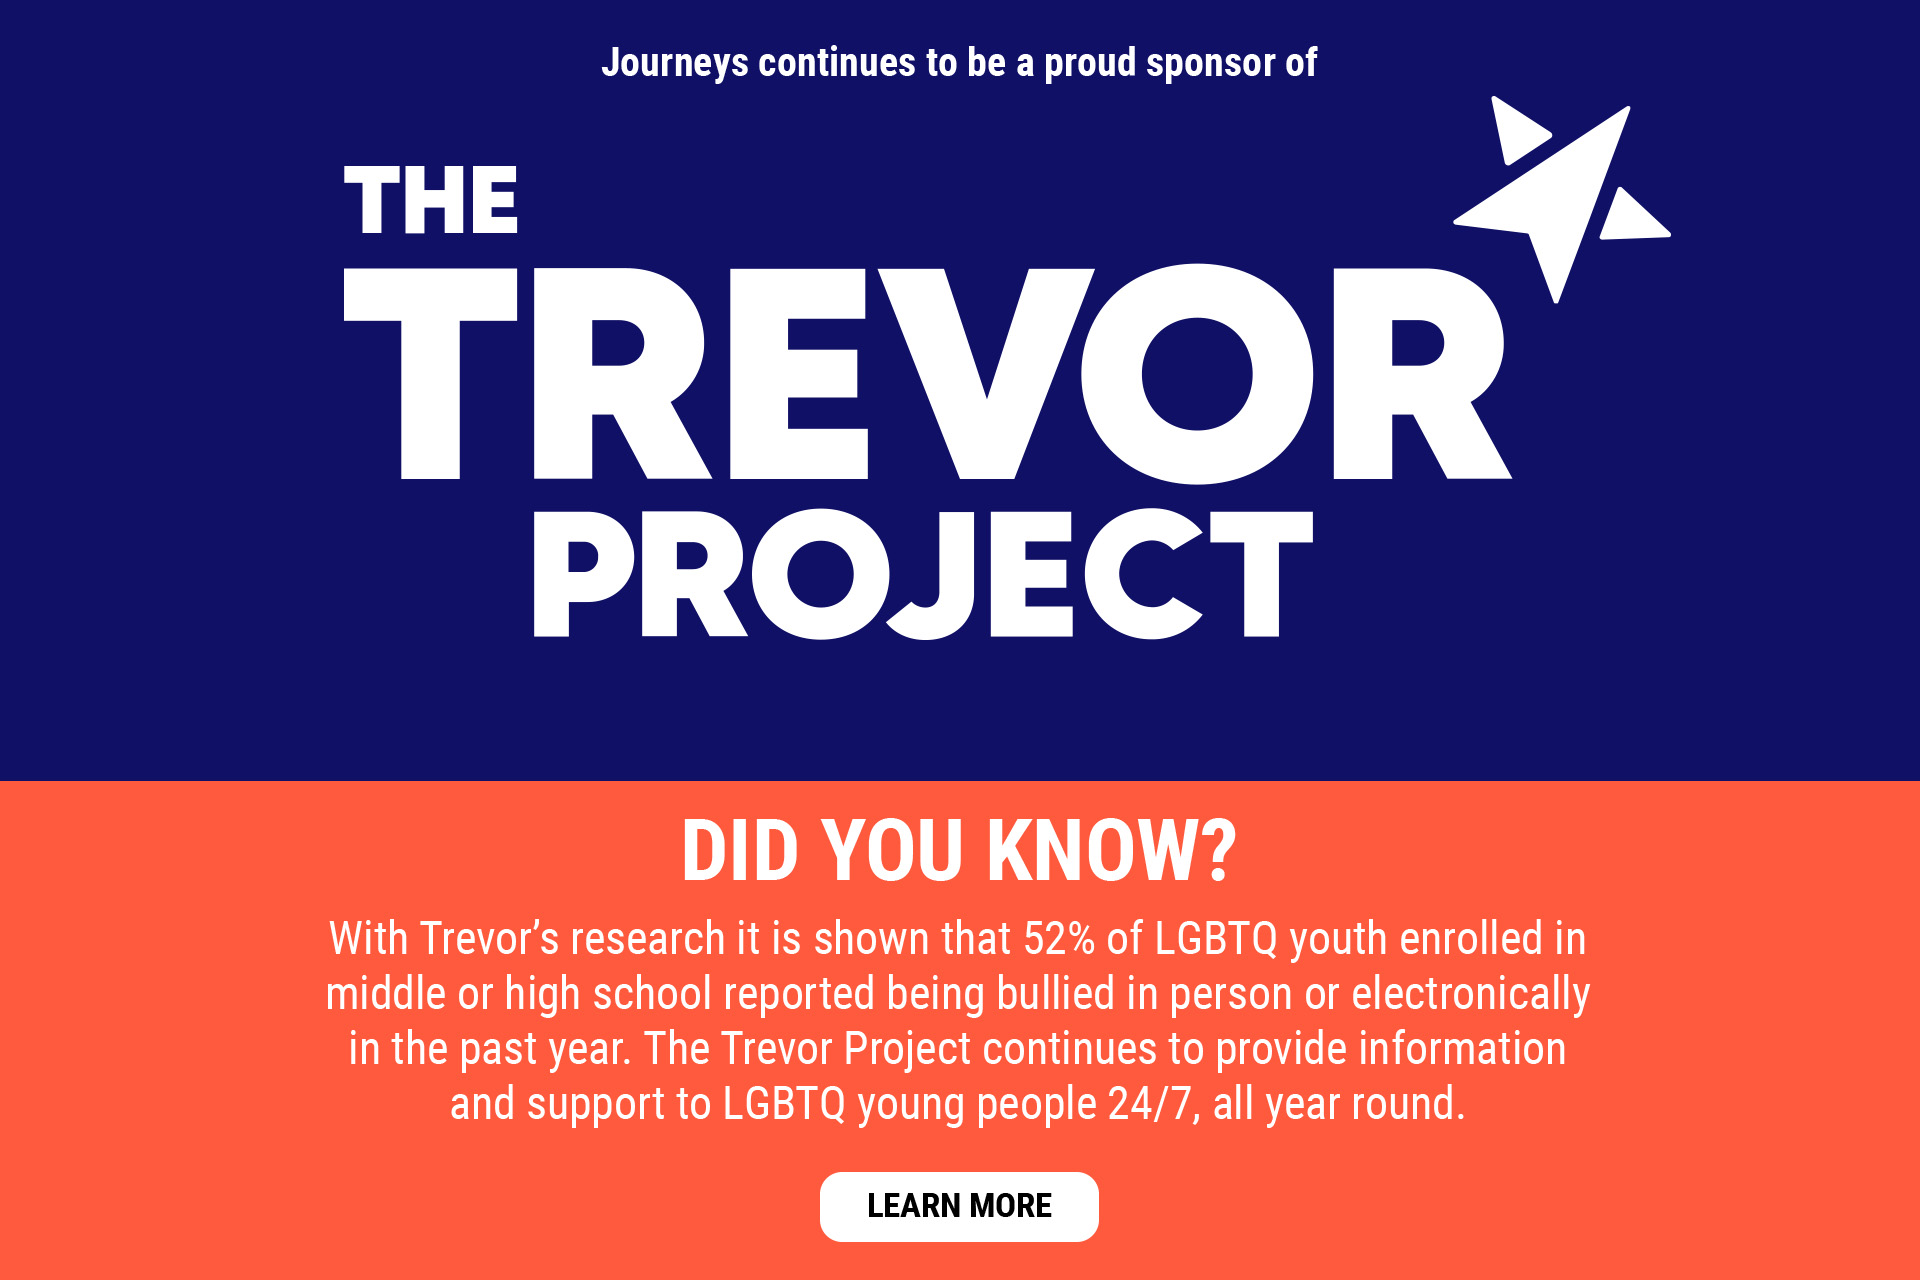 Learn More about The Trevor Project